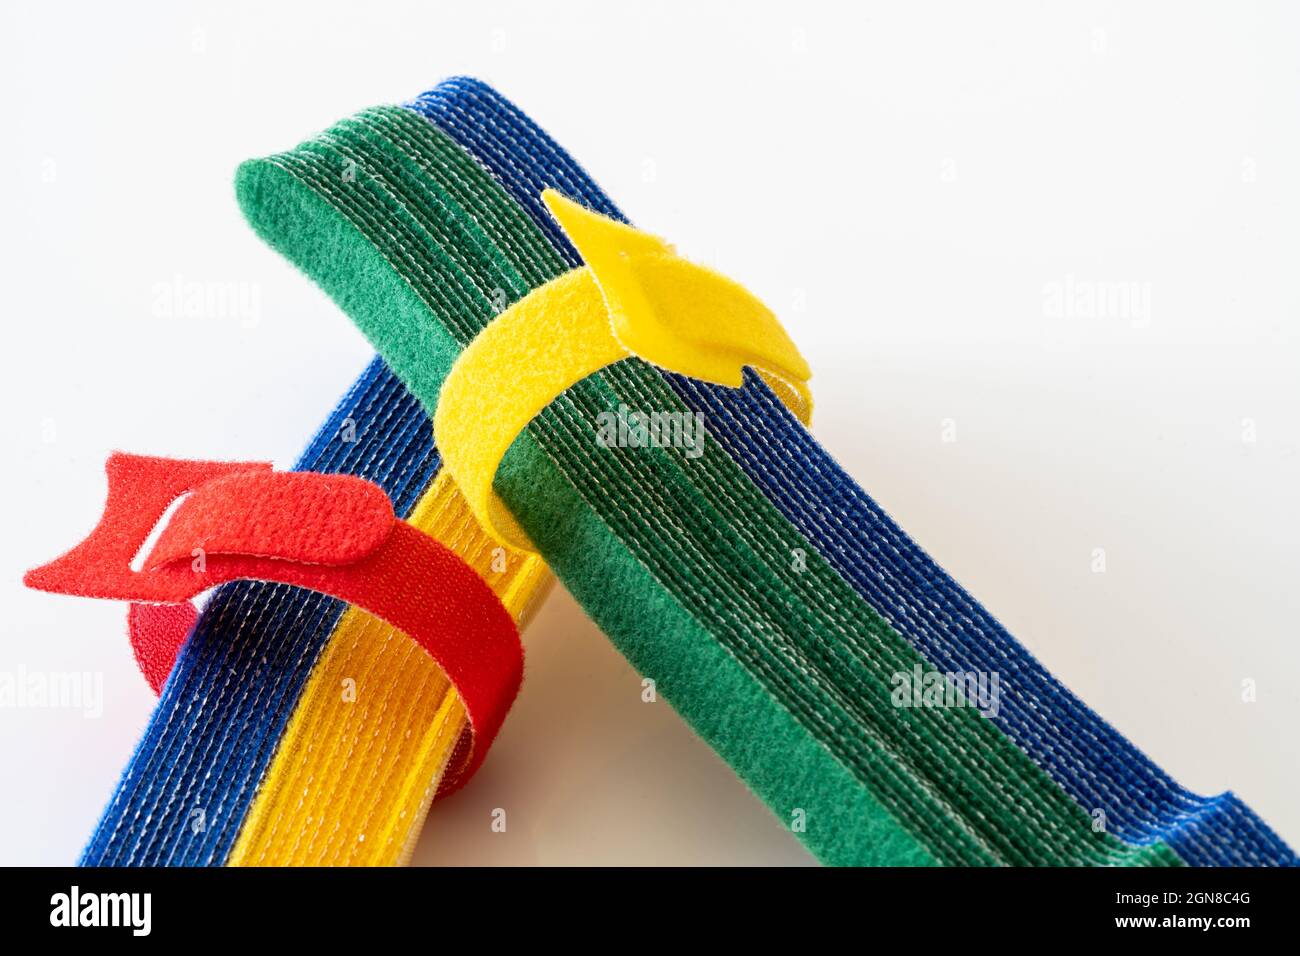 pack of small short colored velcro hook and loop fastner ties Stock Photo